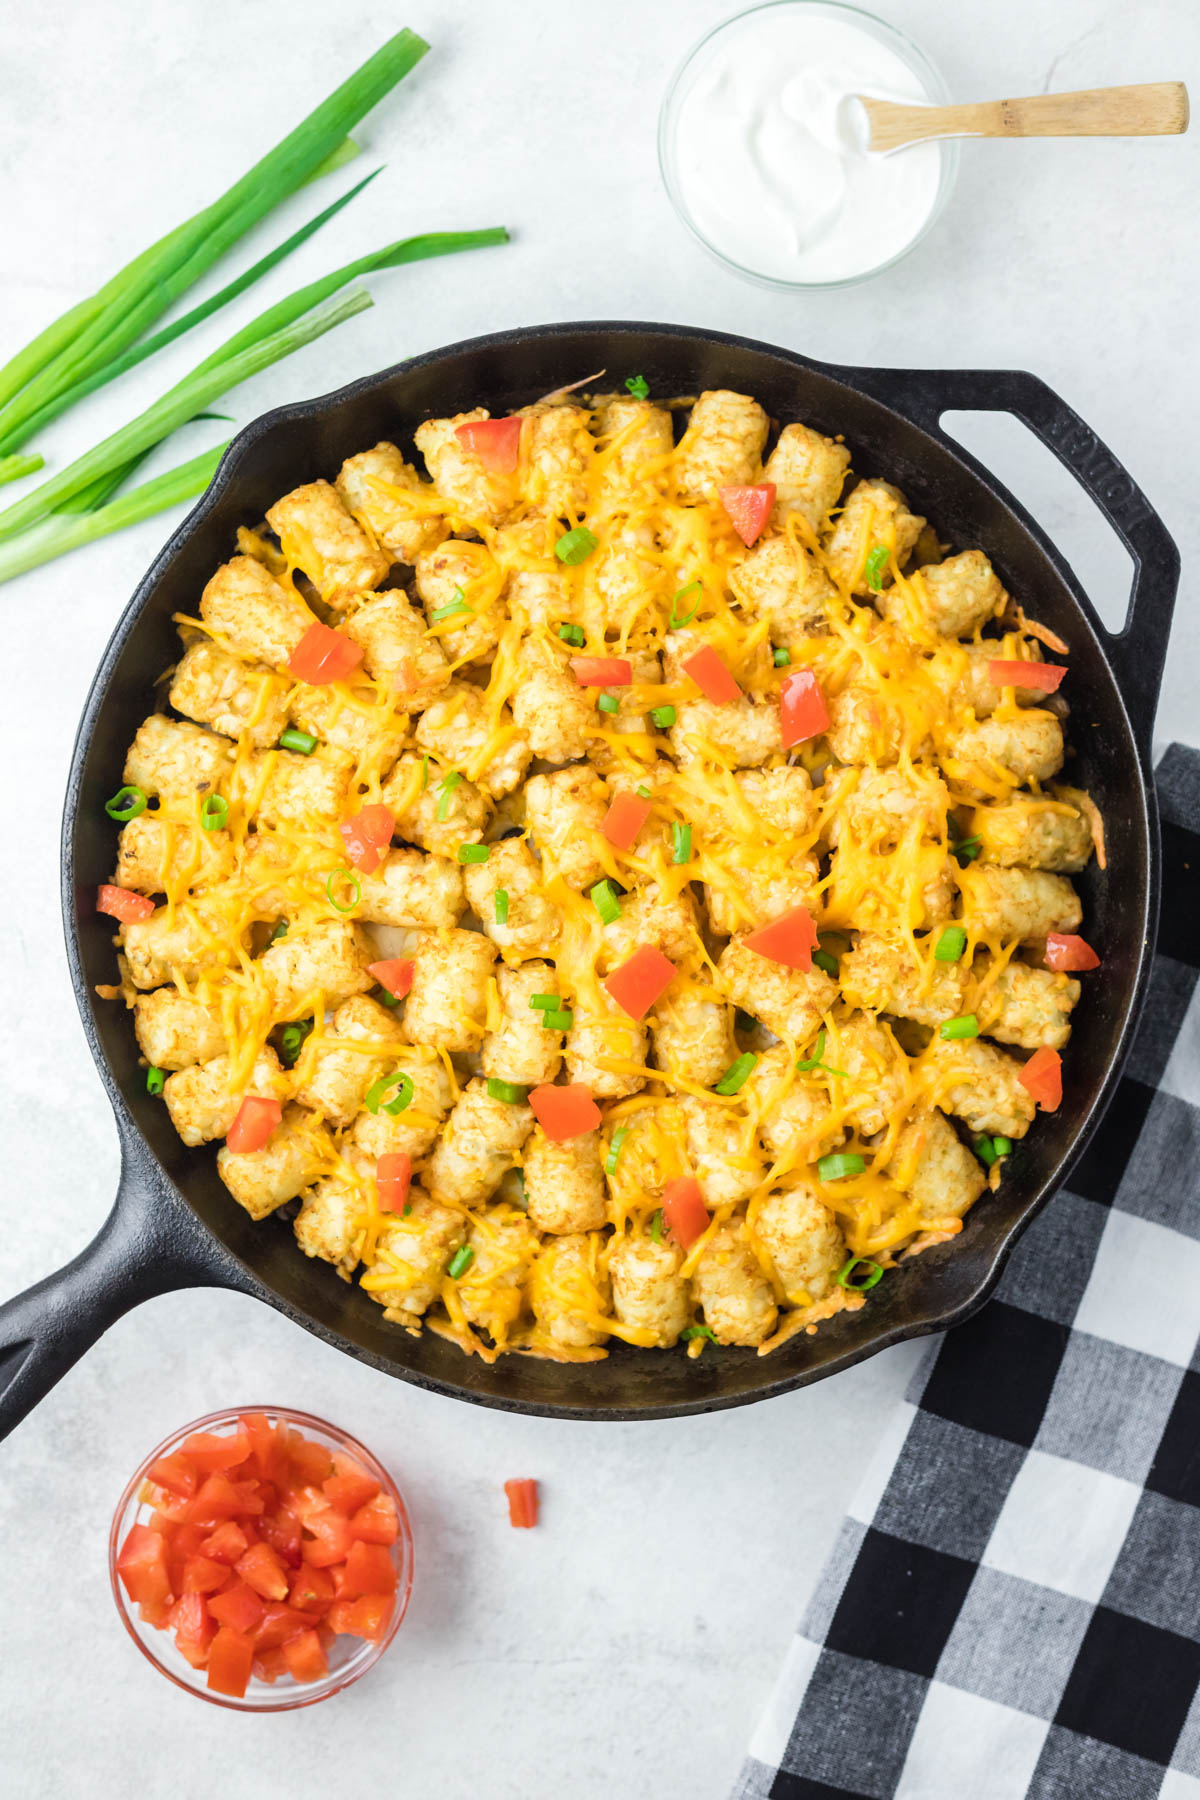 Overhead shot of black skillet containing tater tot casserole sprinkled with melted cheese, diced tomatoes and green onions. Glass bowls of extra ingredients are visible at the top and bottom of the image. 